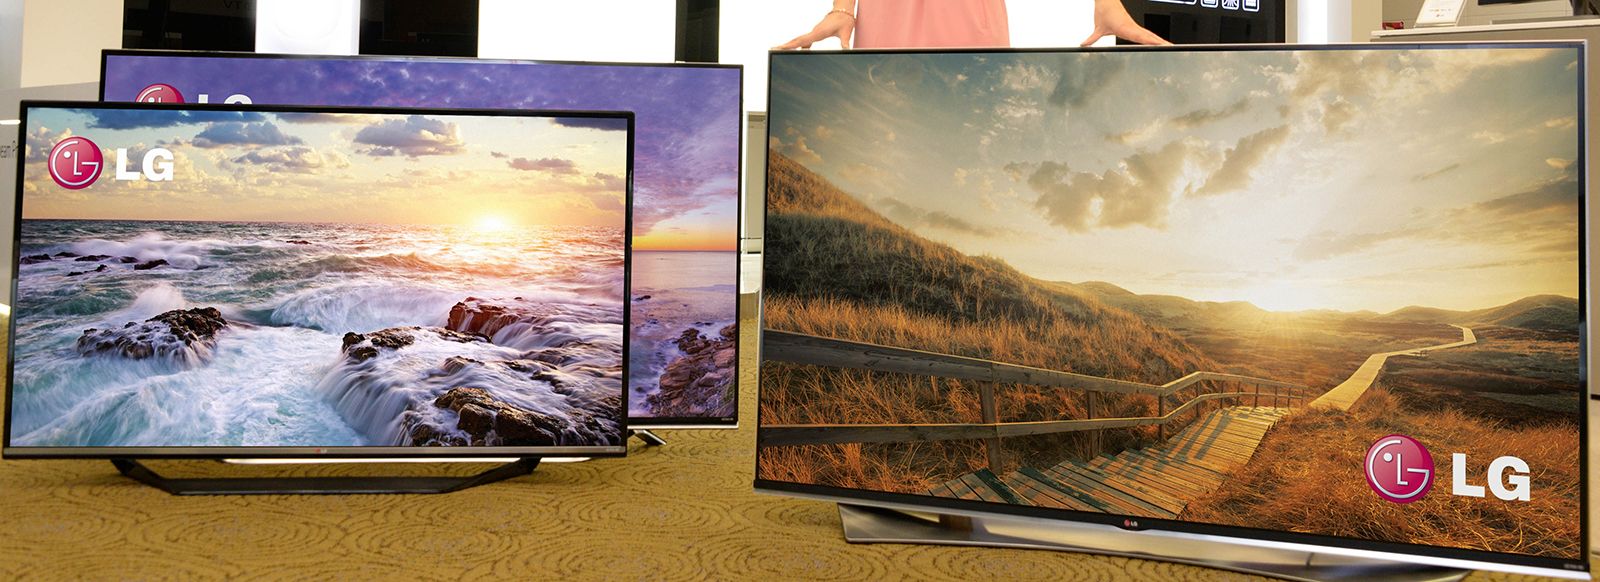 lg’s ces tv line up suggests 2015 will be the year of 4k image 1